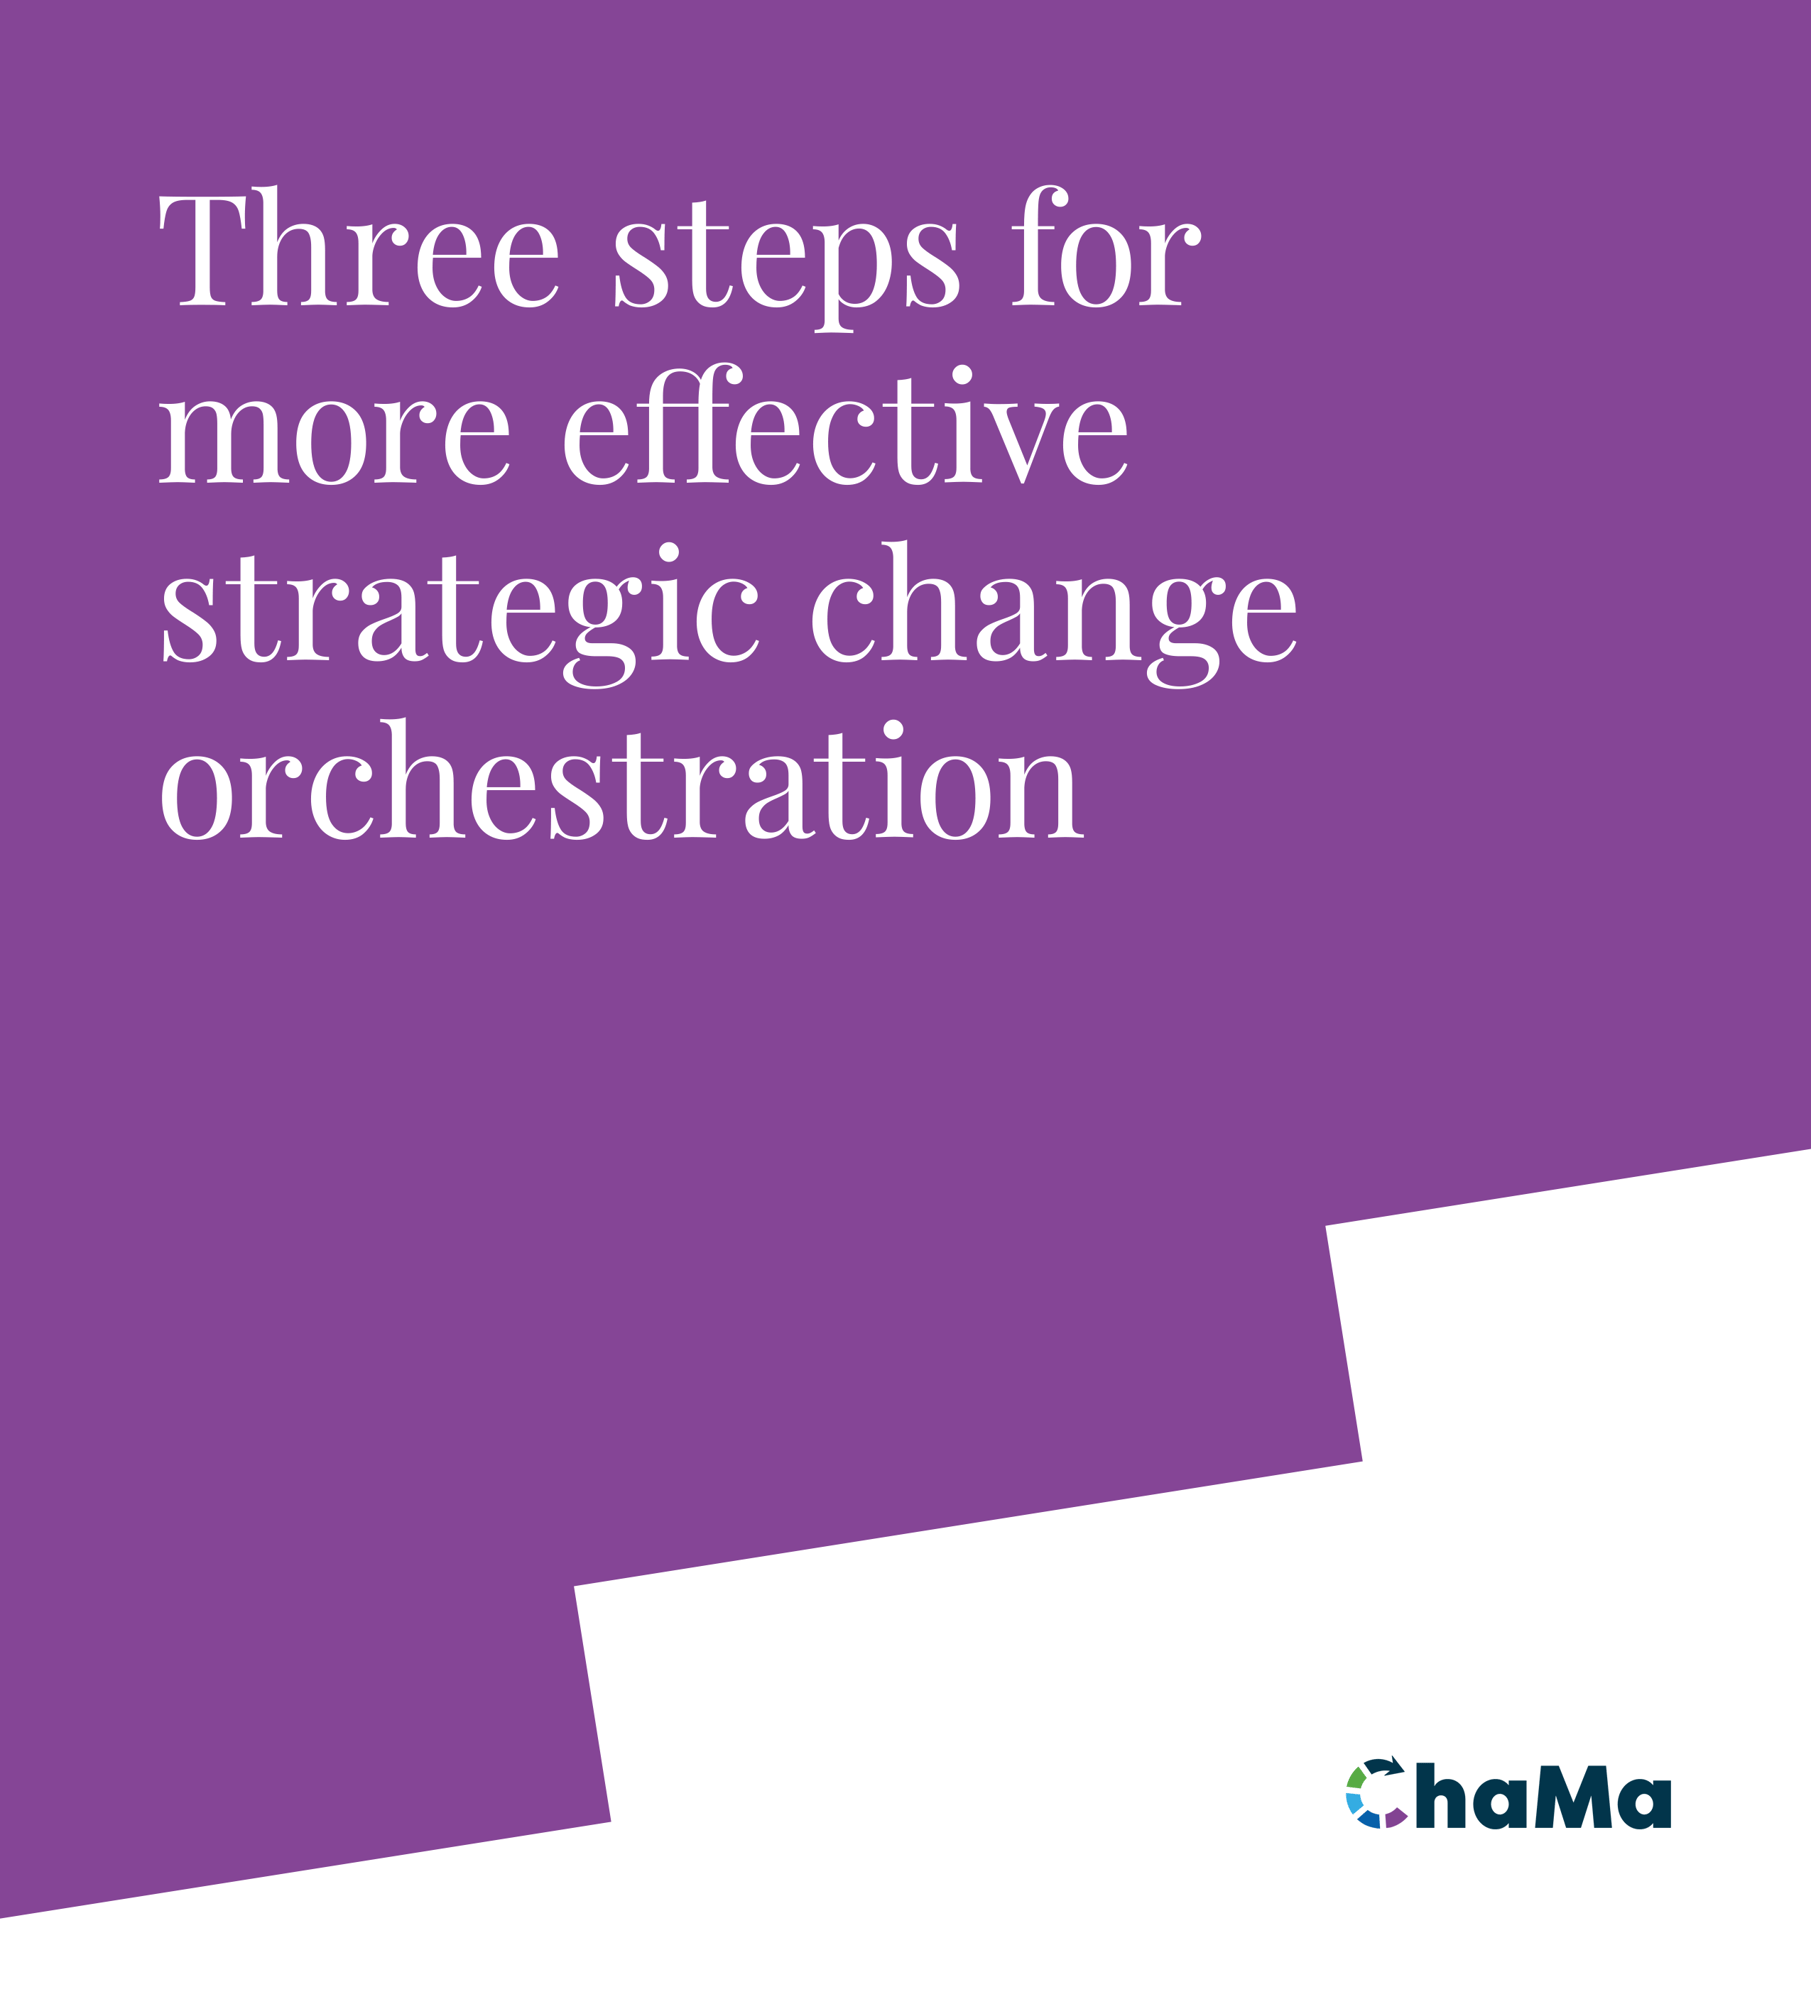 Chama 3-steps-eguide-cover4(new)